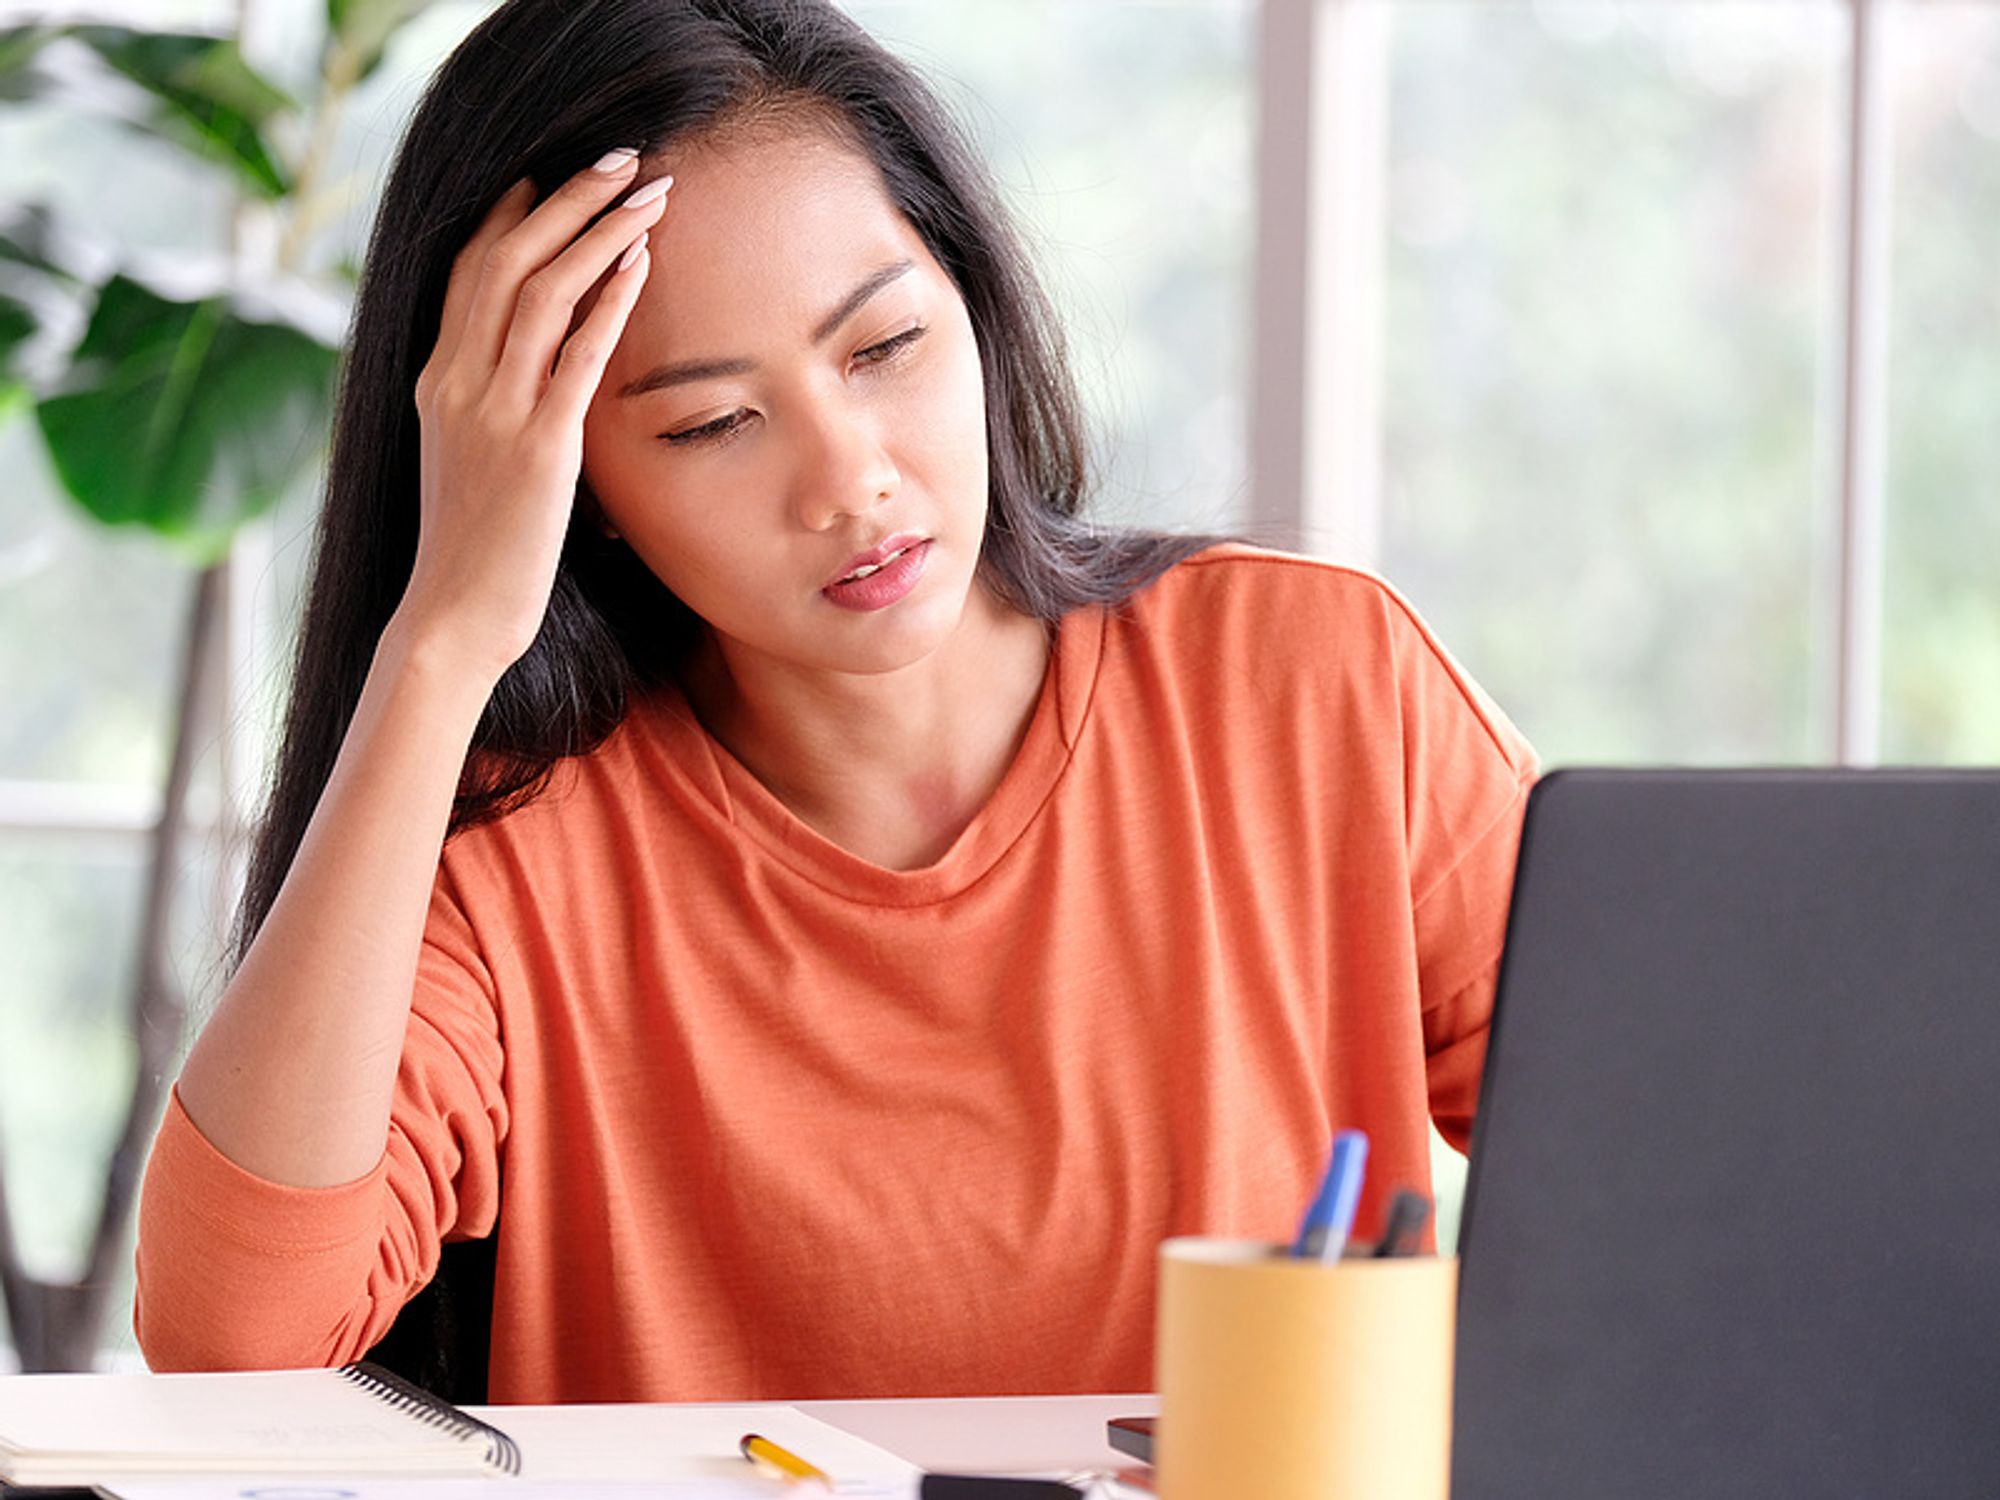 Frustrated woman struggling to stay motivated while looking for a job